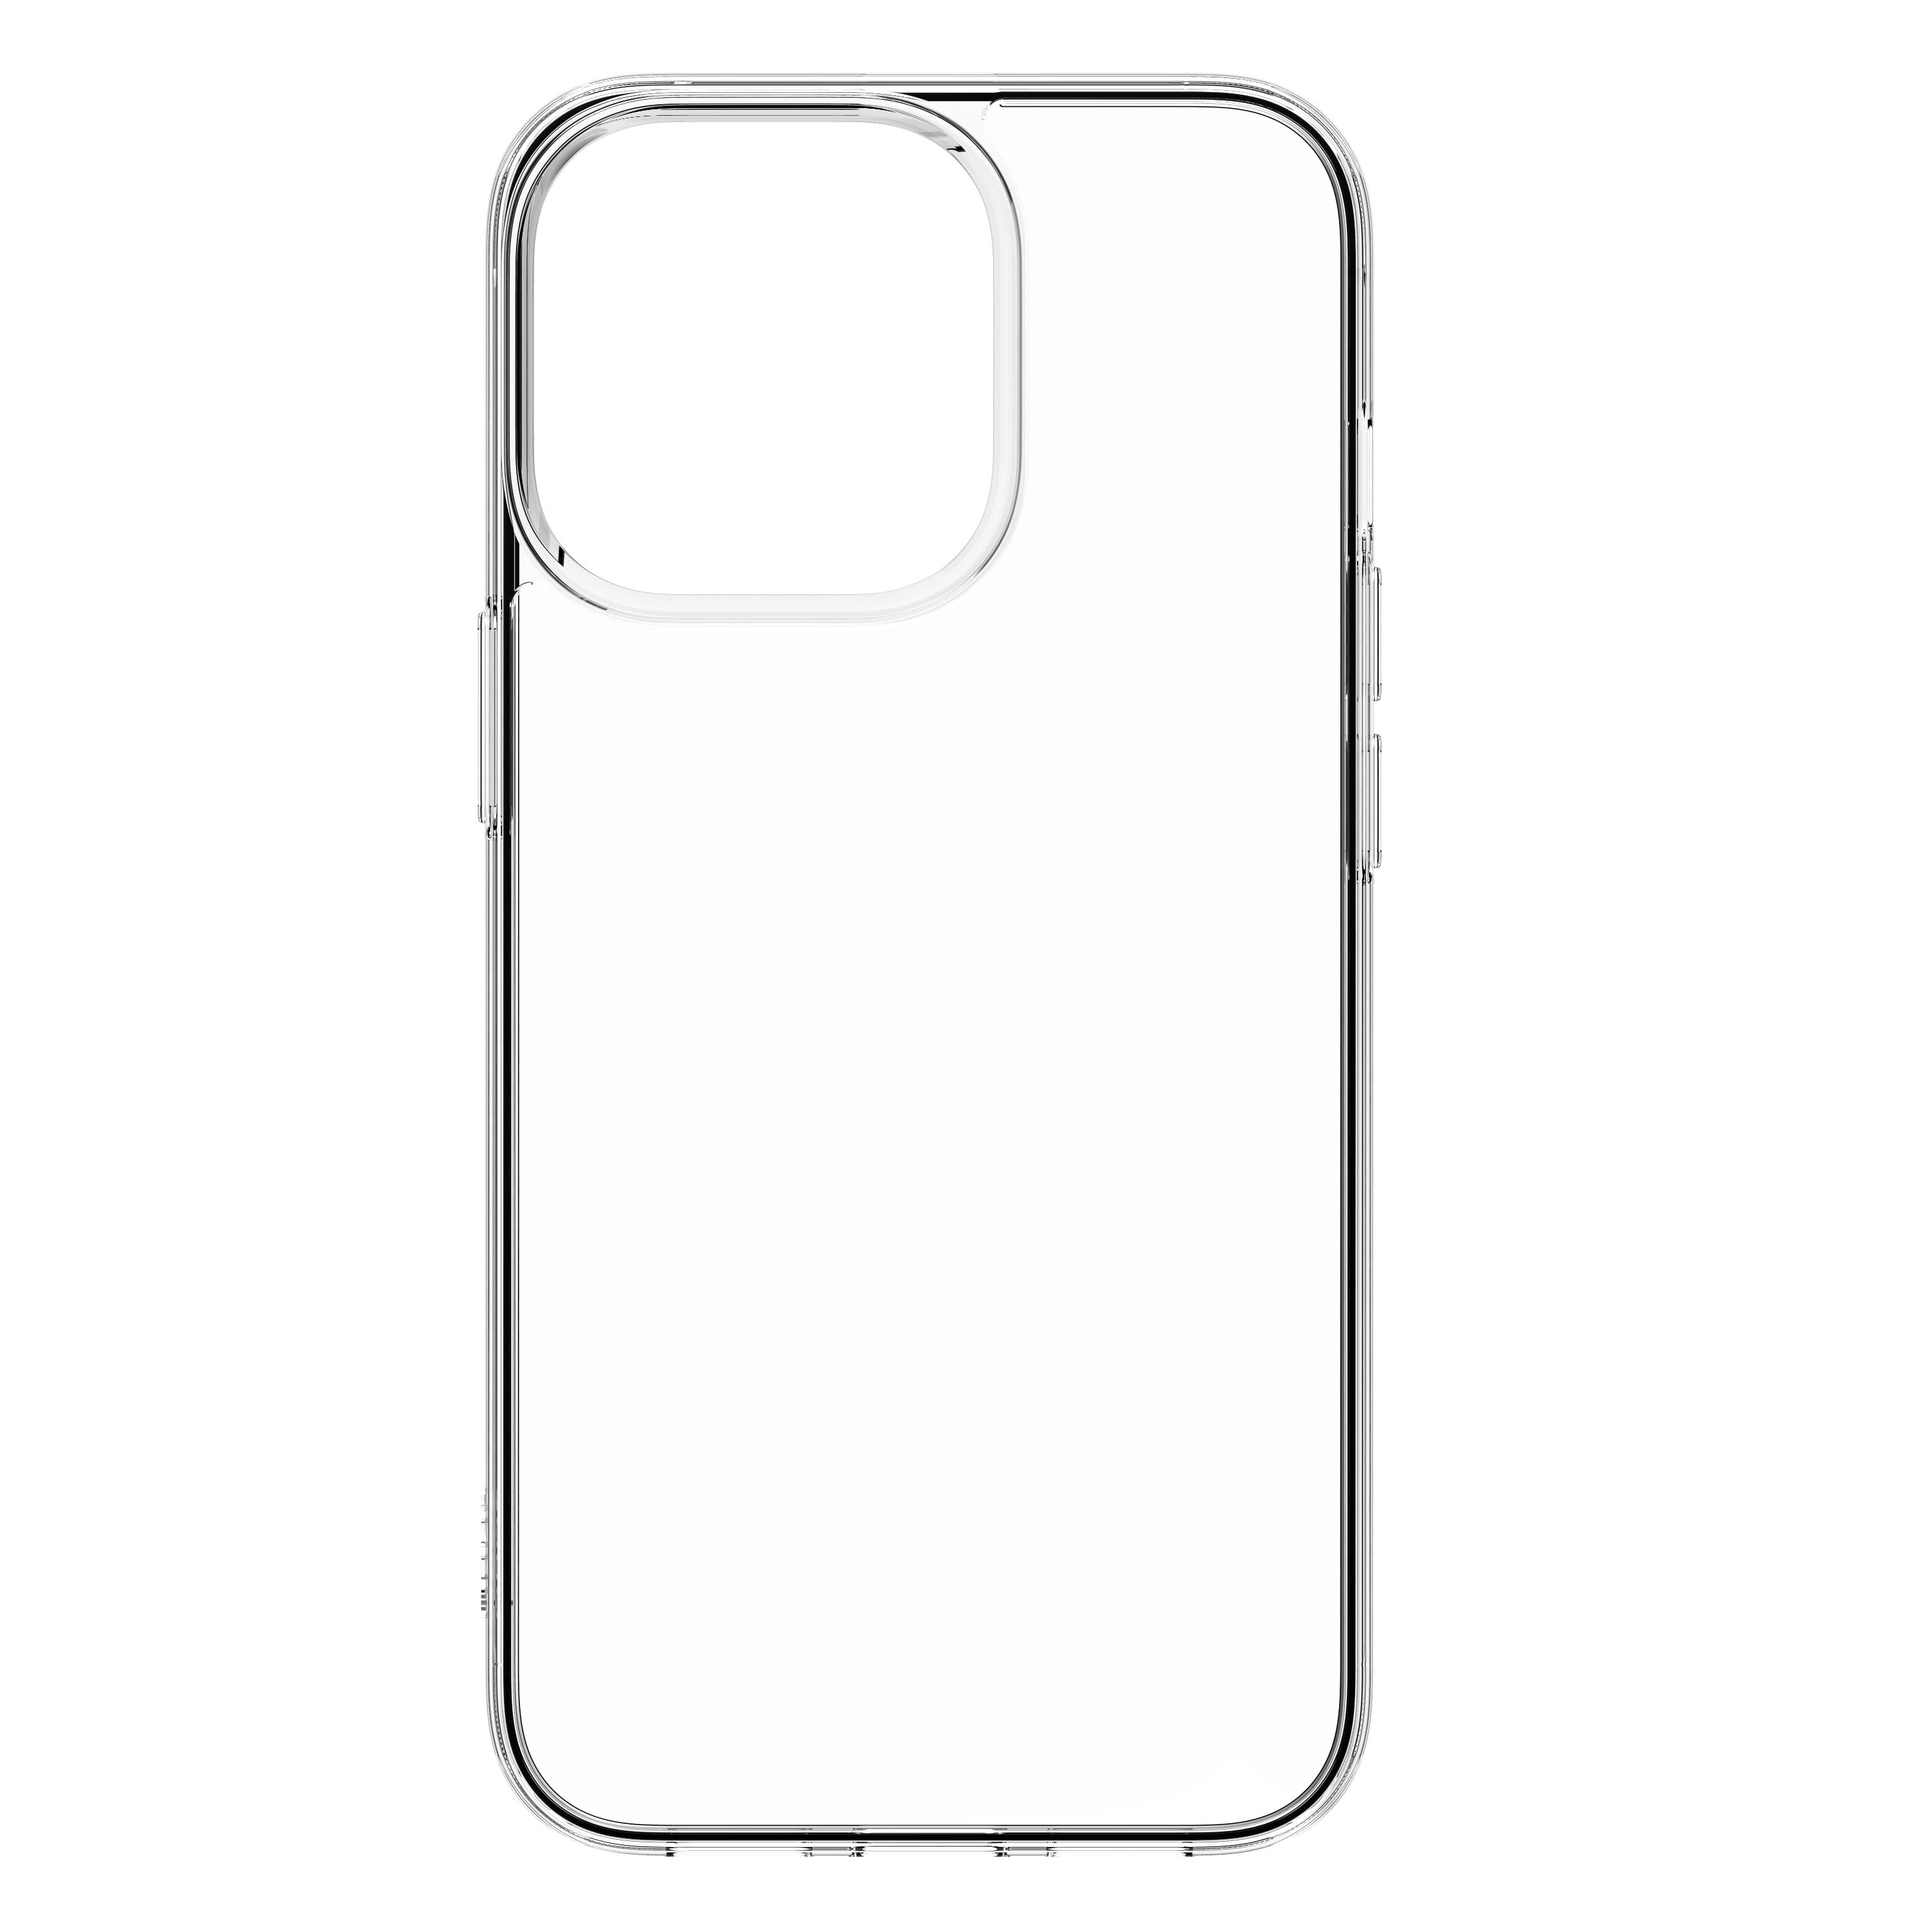 QDOS Hybrid Clear for iPhone 13 Series